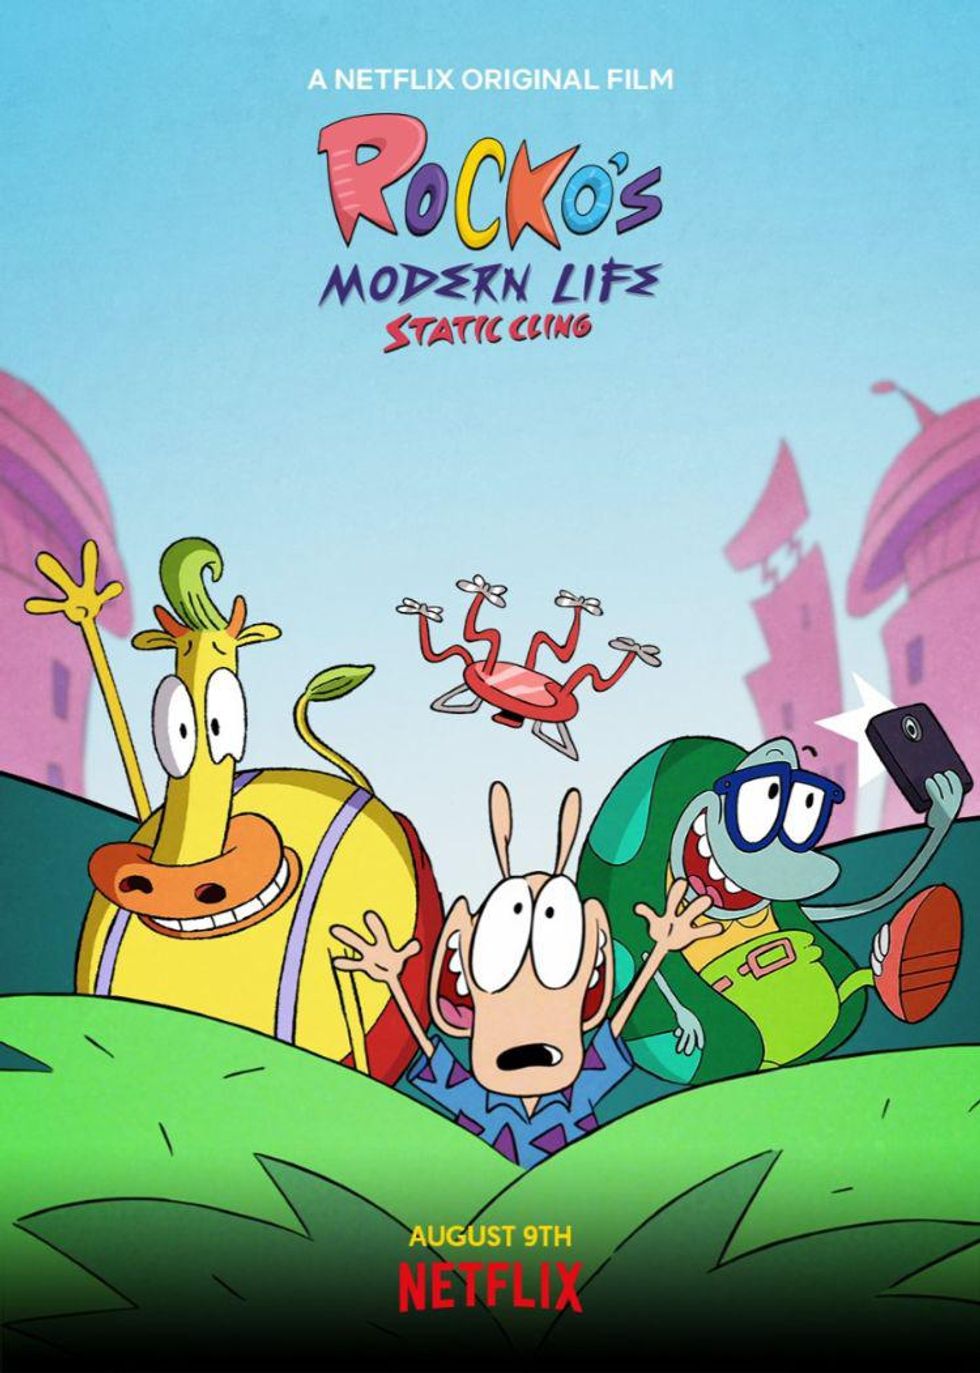 Netflix's 'Rocko’s Modern Life' Special Features a Moving Trans Story